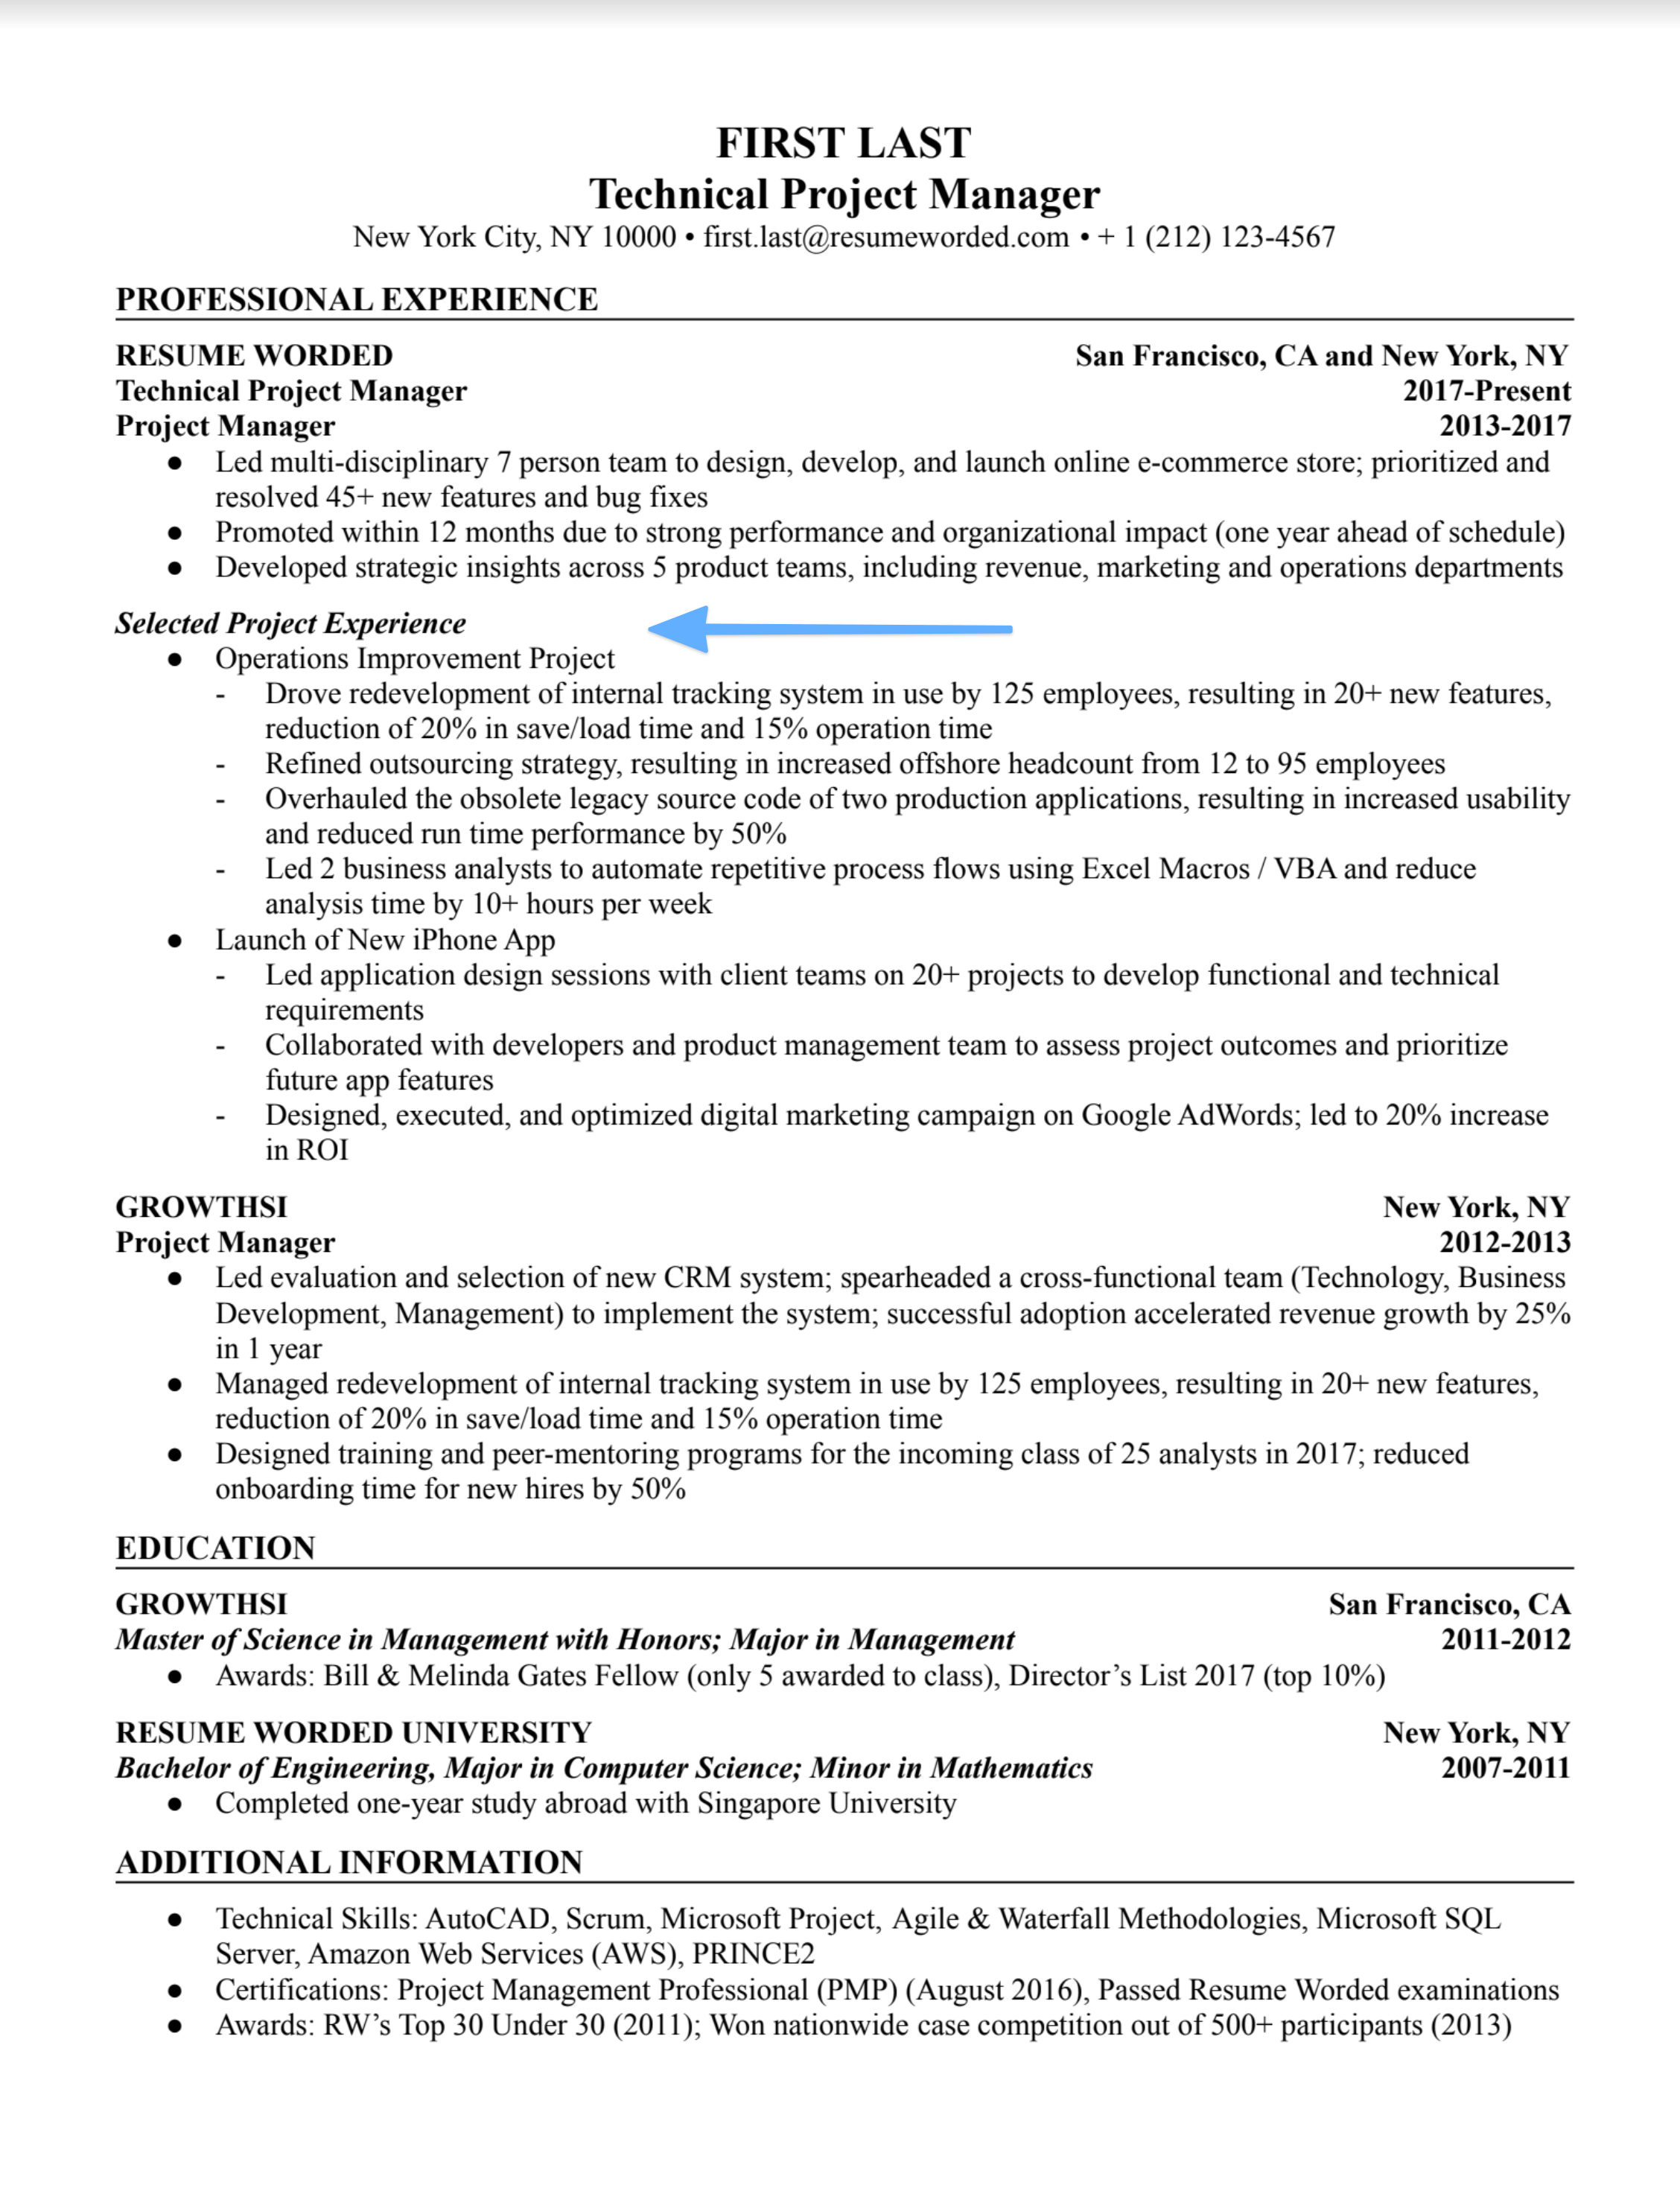 Technical Project Manager resume sample screenshot